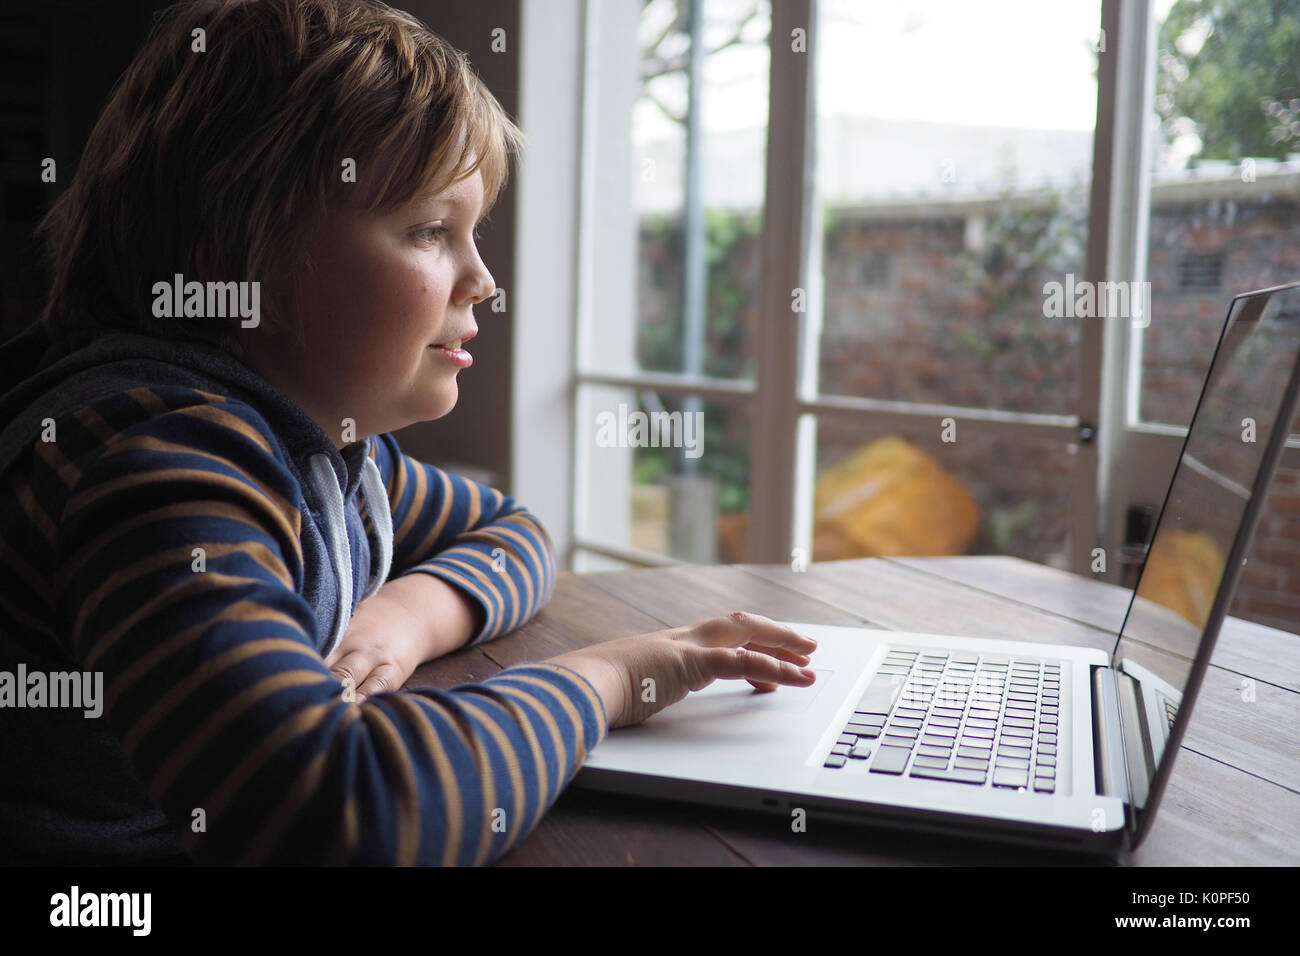 Young boy using a computer at home Stock Photo